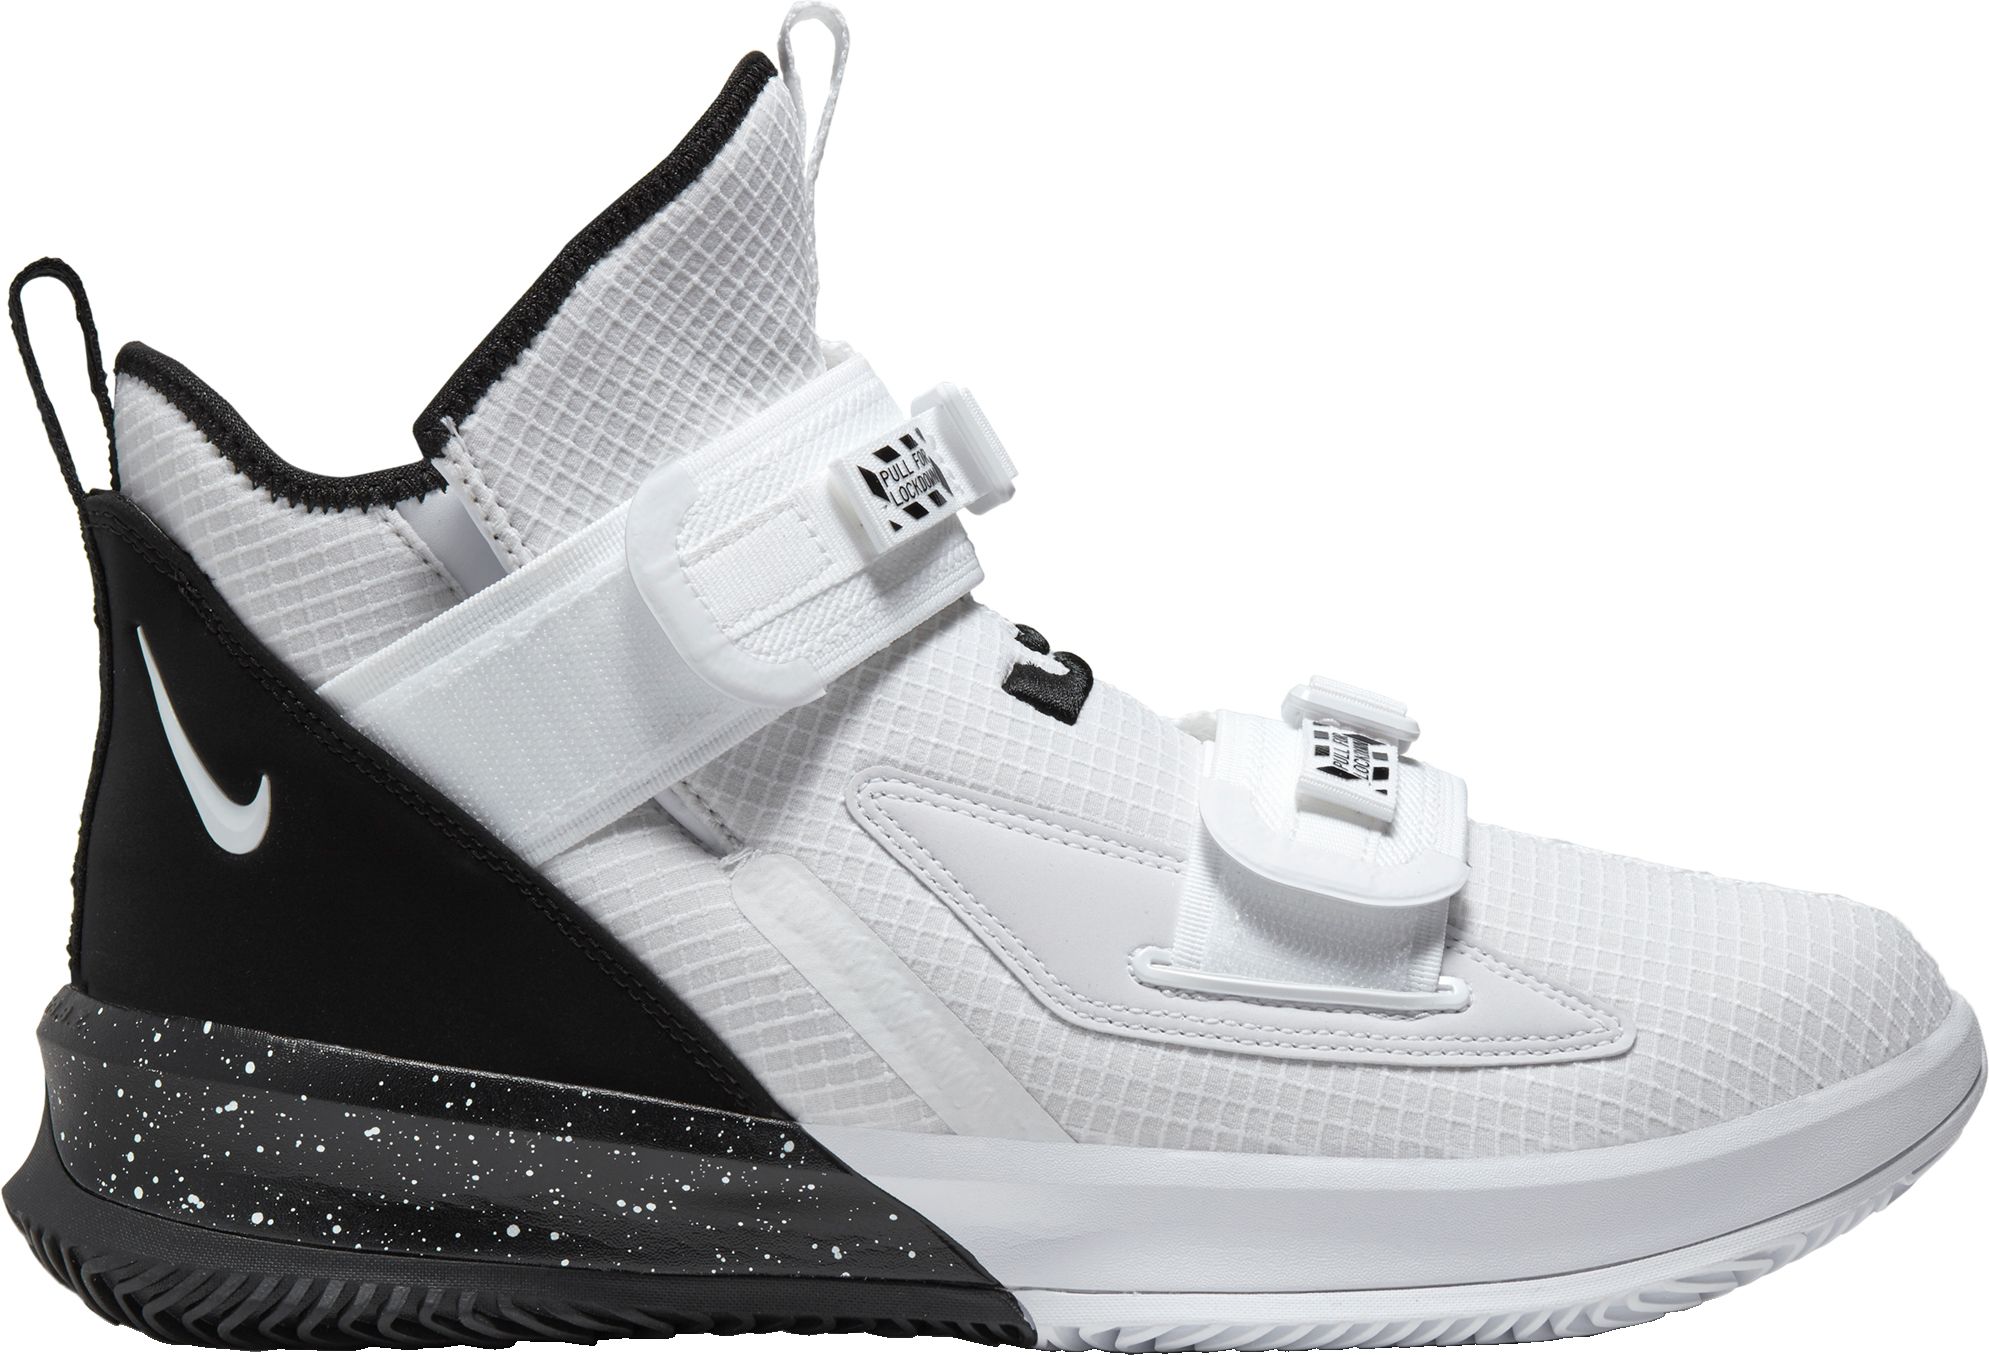 black and white lebron james shoes